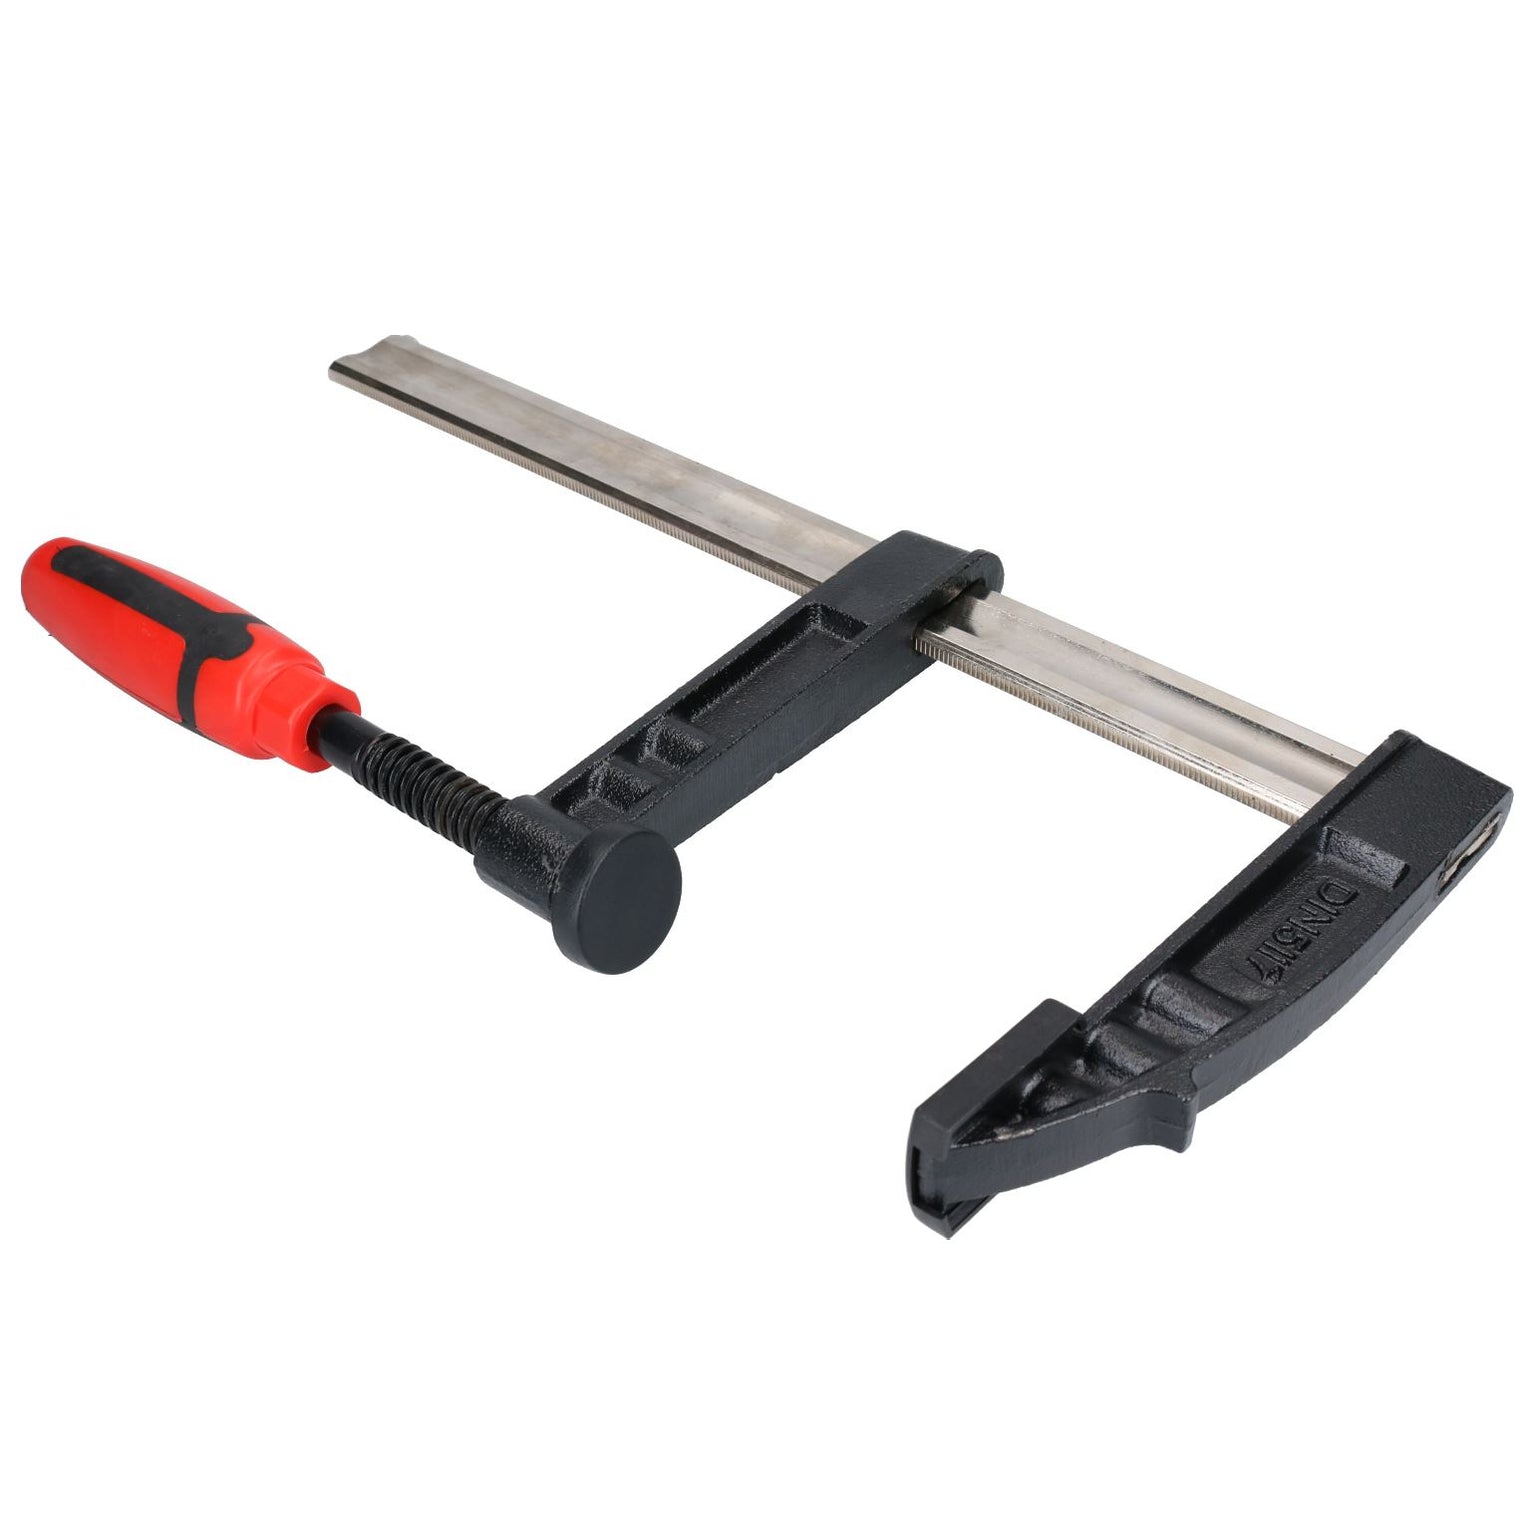 Sliding F Clamps Bar Profile Clamp Holder Fastener Fastening Tool 300mm x 120mm